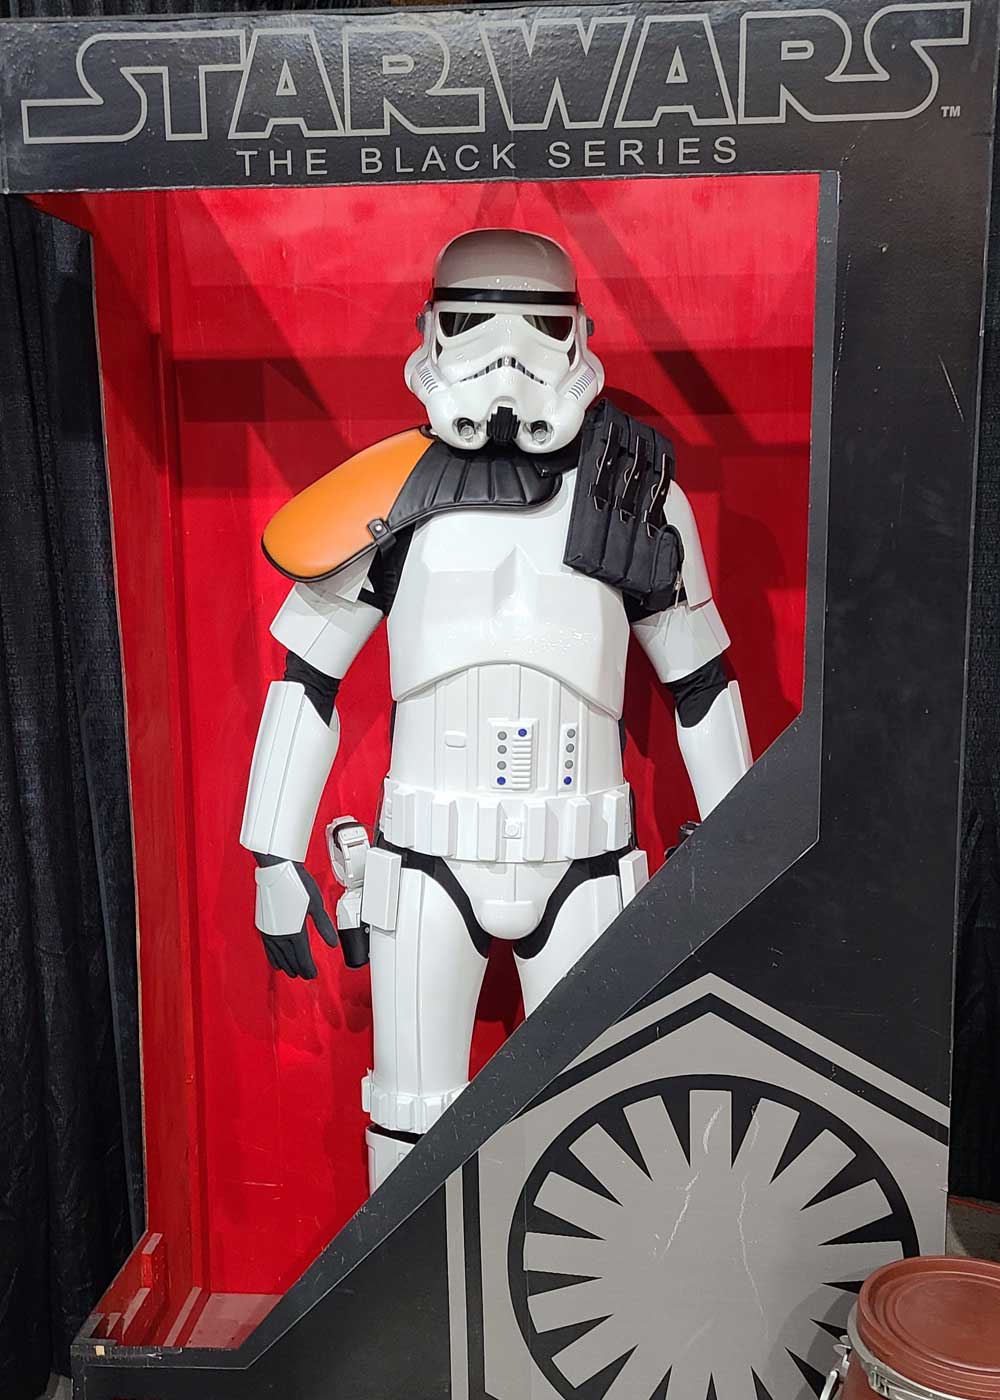 Star Wars Stormtrooper Armour review from Jon